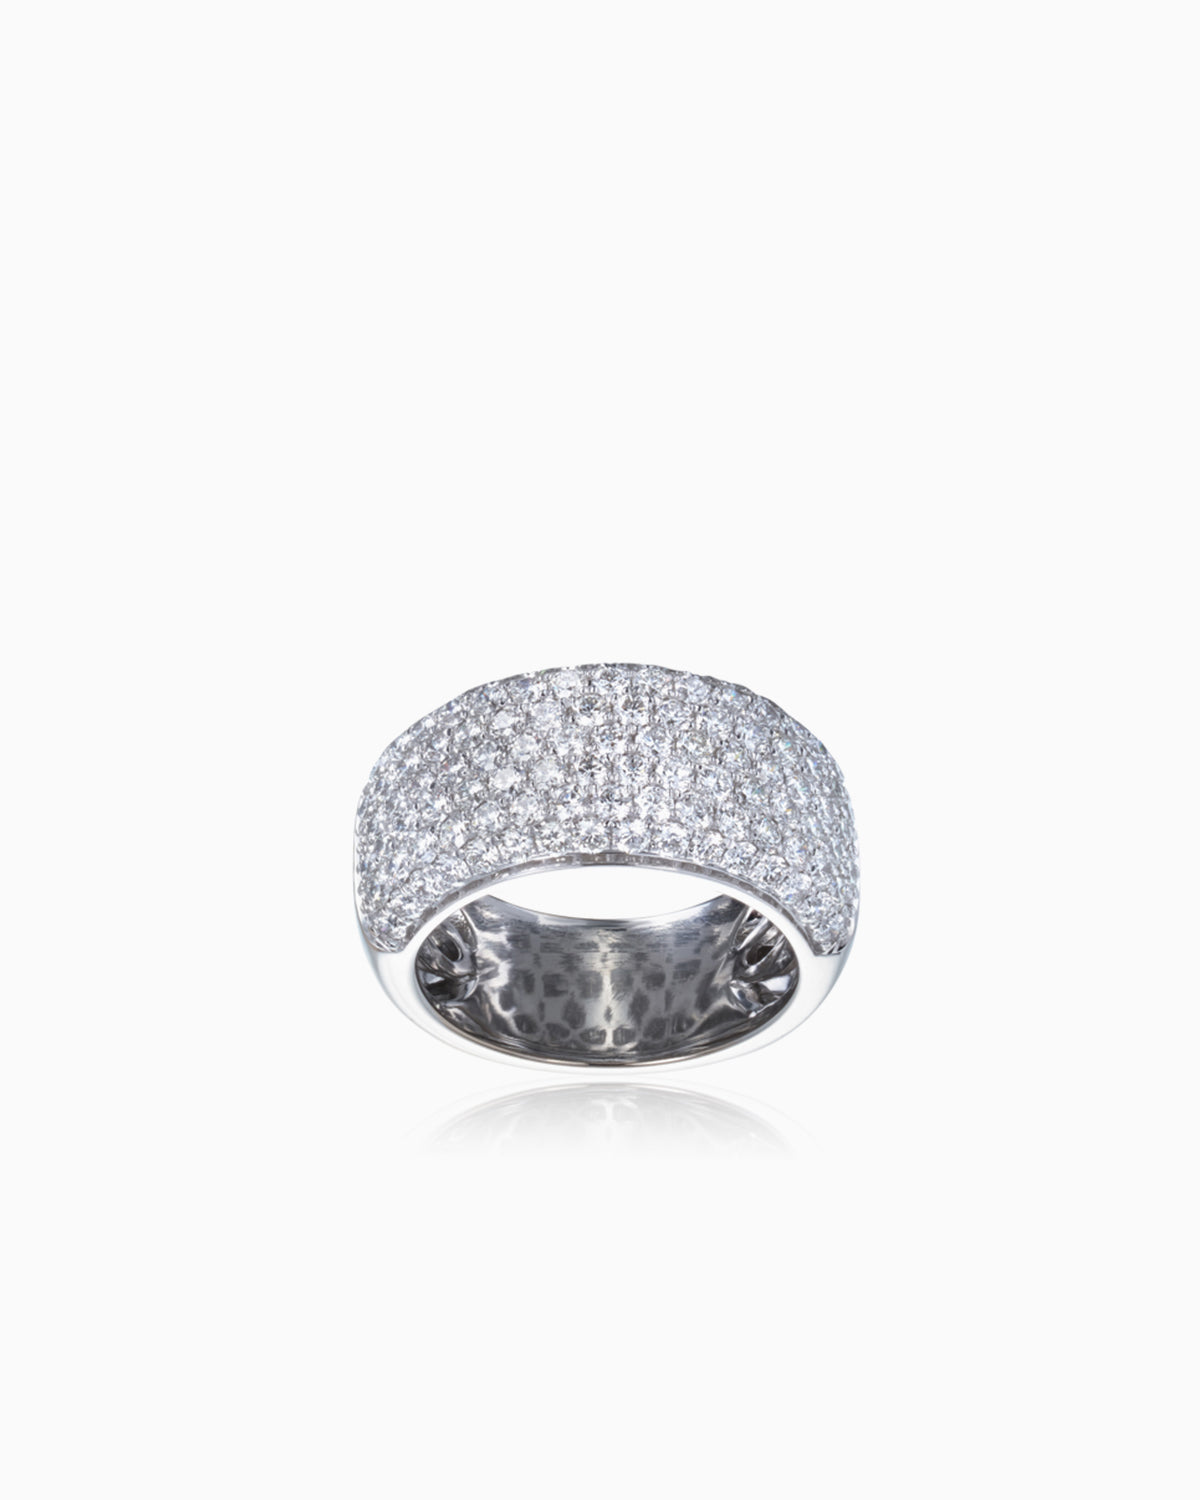 2.31ct pave diamond dress ring crafted in 18kwg by claude and me jewellery